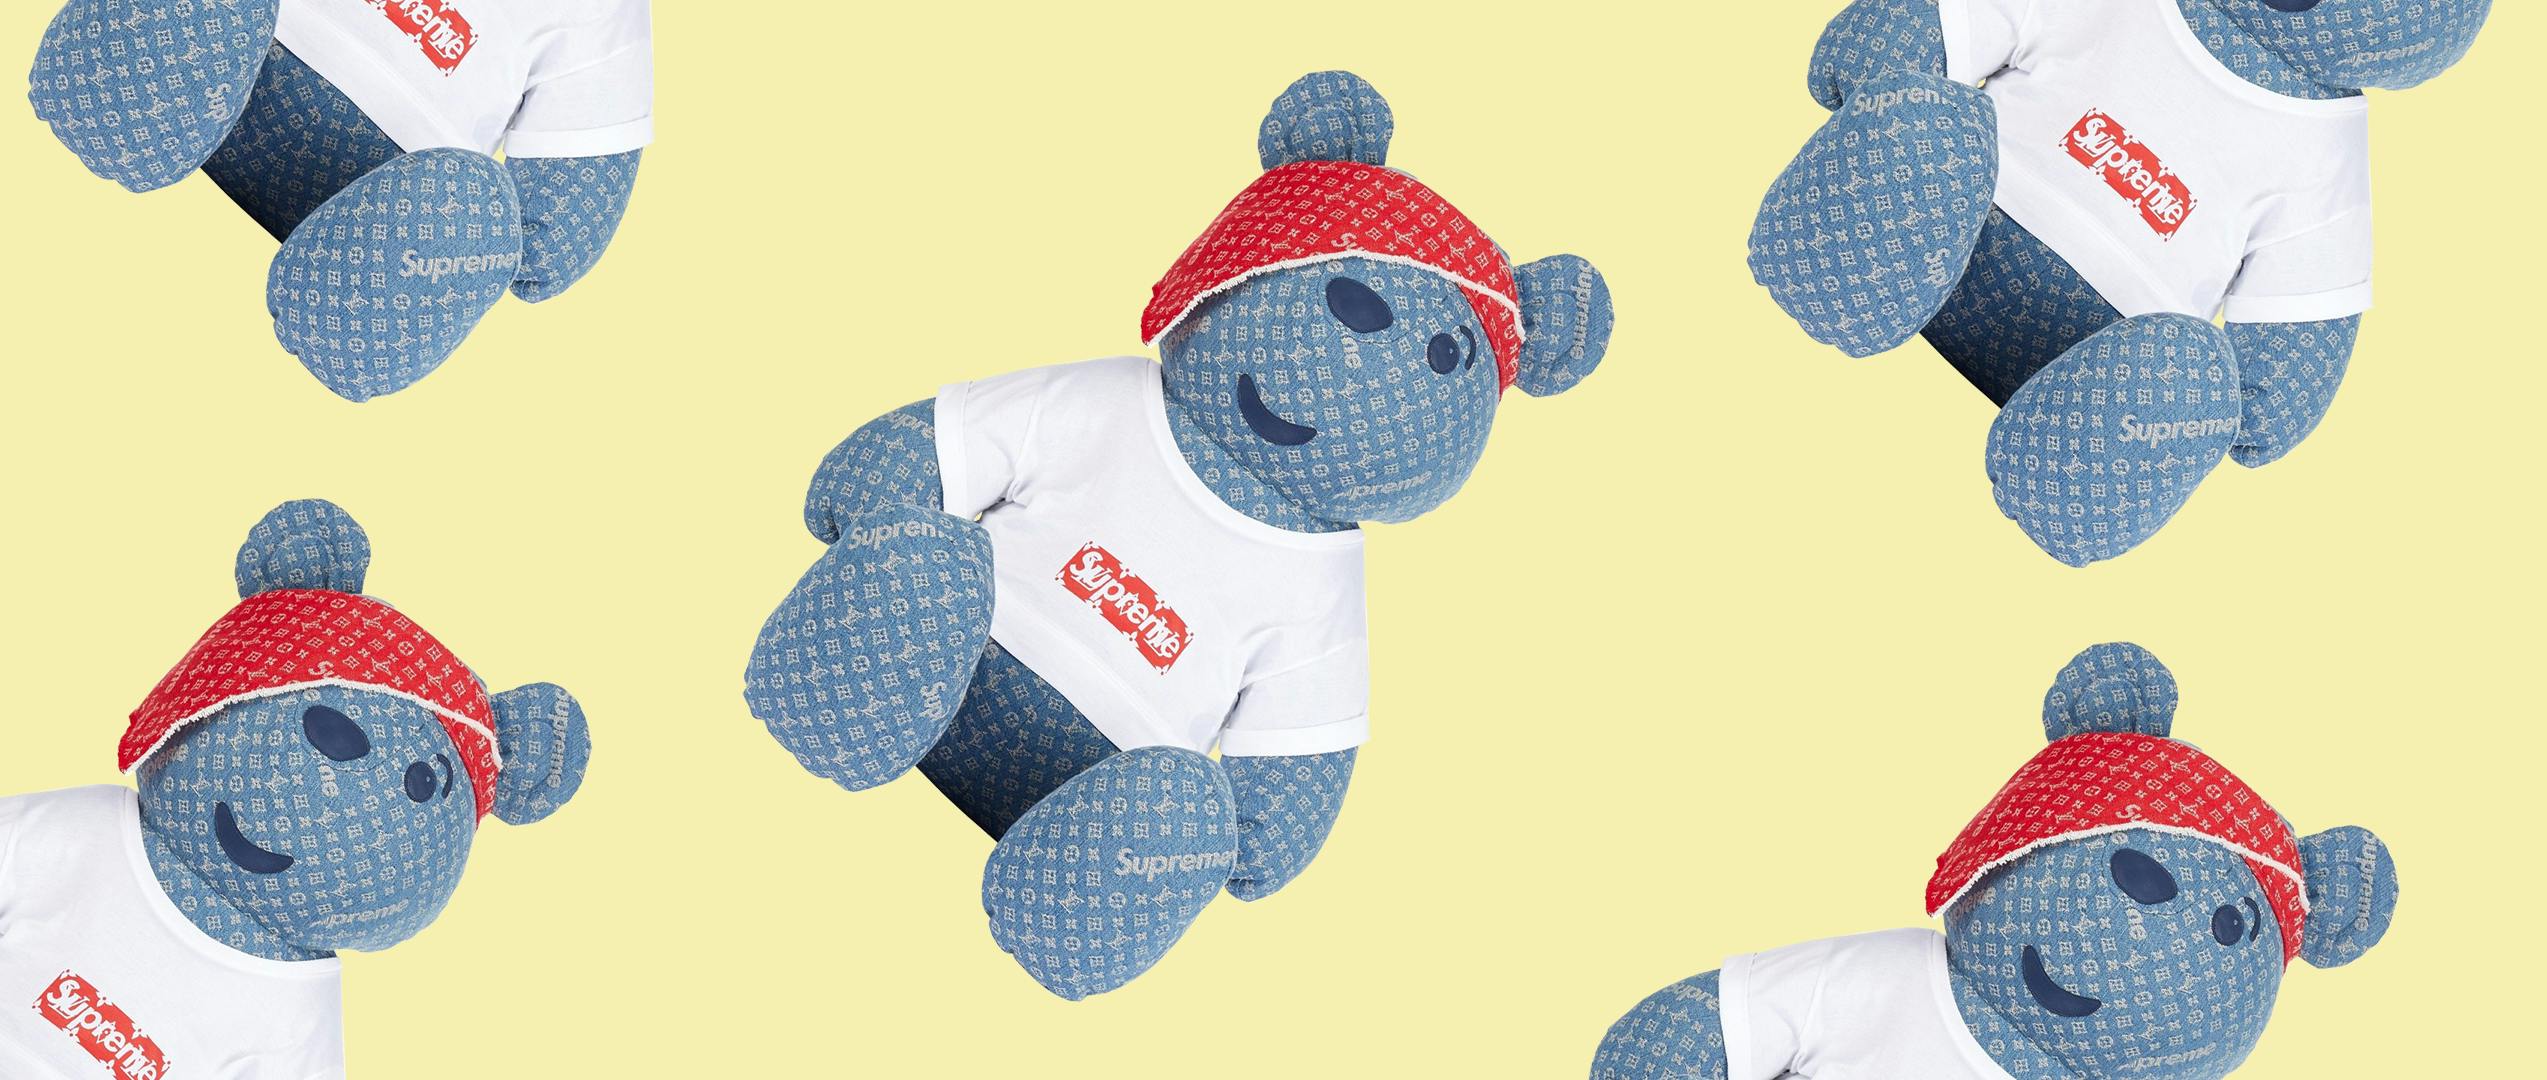 DropsByJay on X: The Supreme x Louis Vuitton 1 Of 1 Pudsey The Bear Landed  In Toronto #OD Auctioned Off To Benefit BBC Children In Need S/O To  odtoronto For The Insane